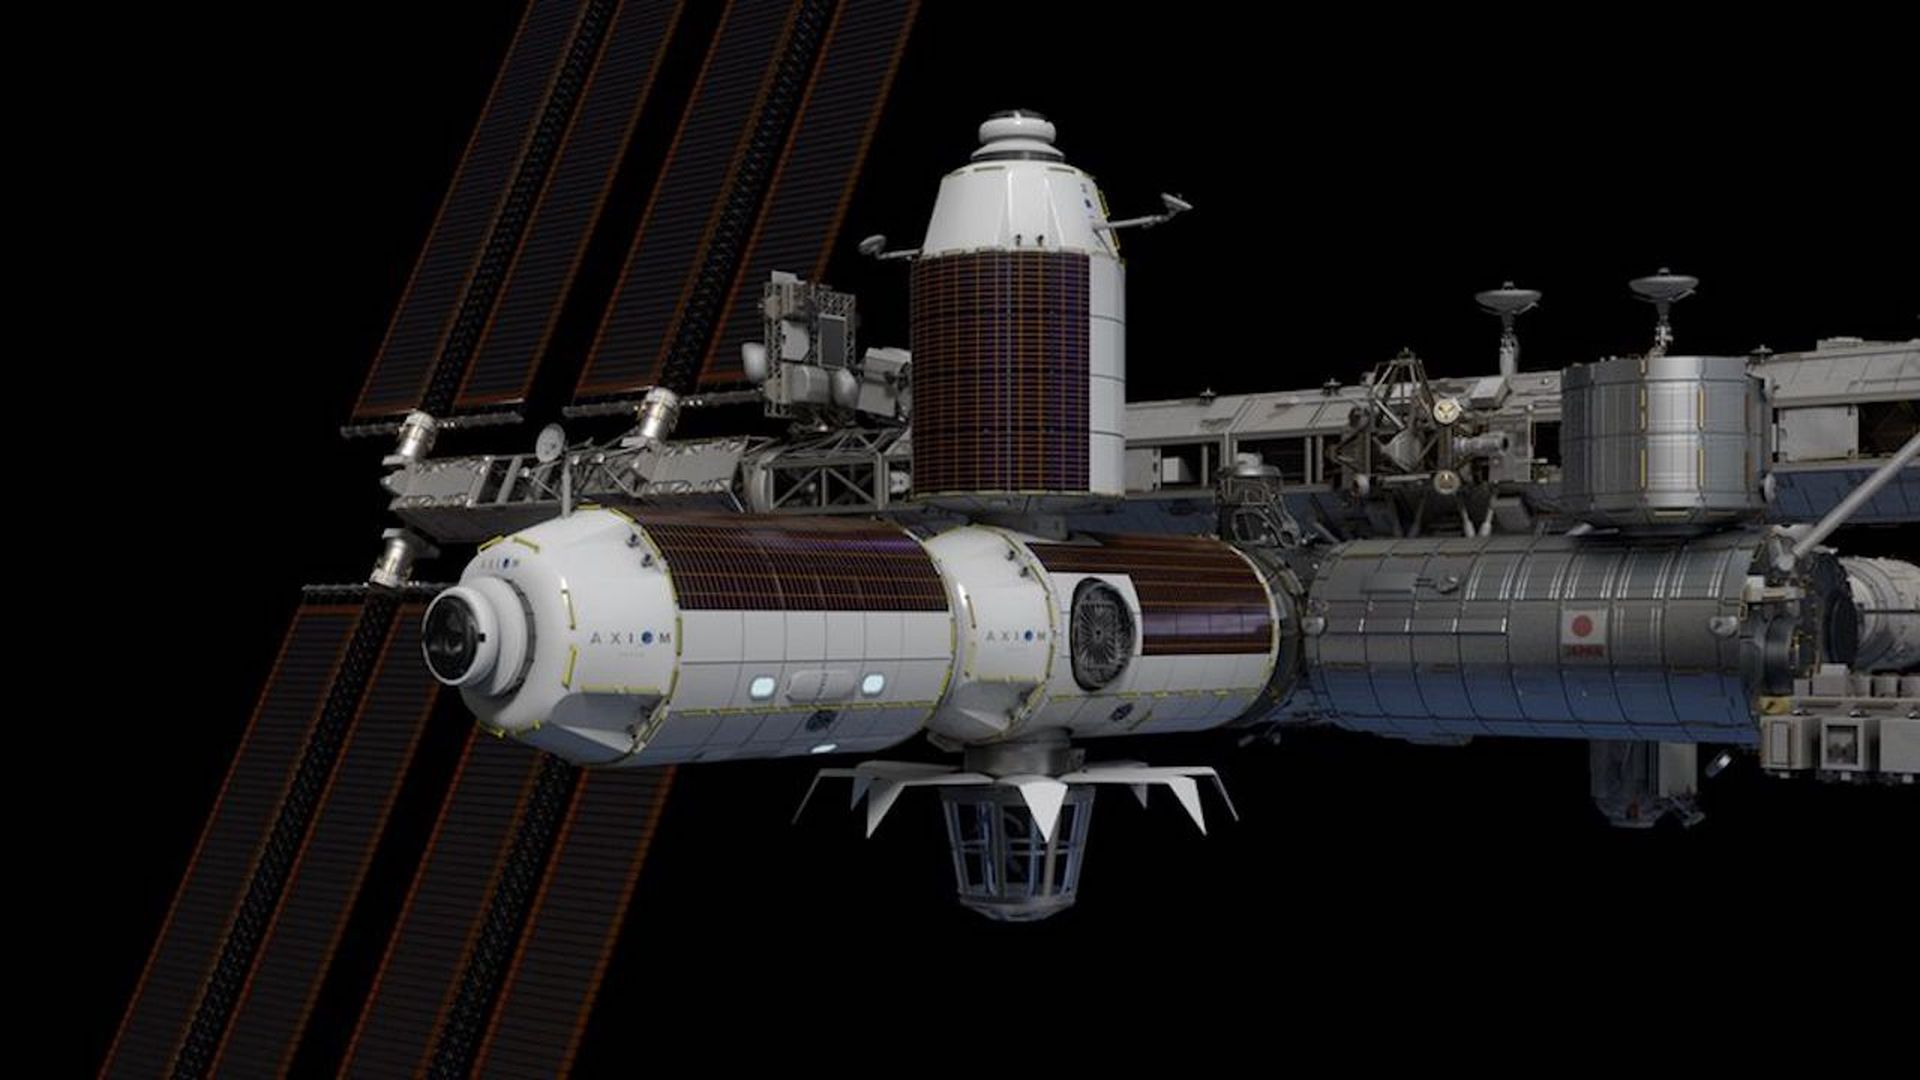 Artist's illustration of Axiom's space station modules